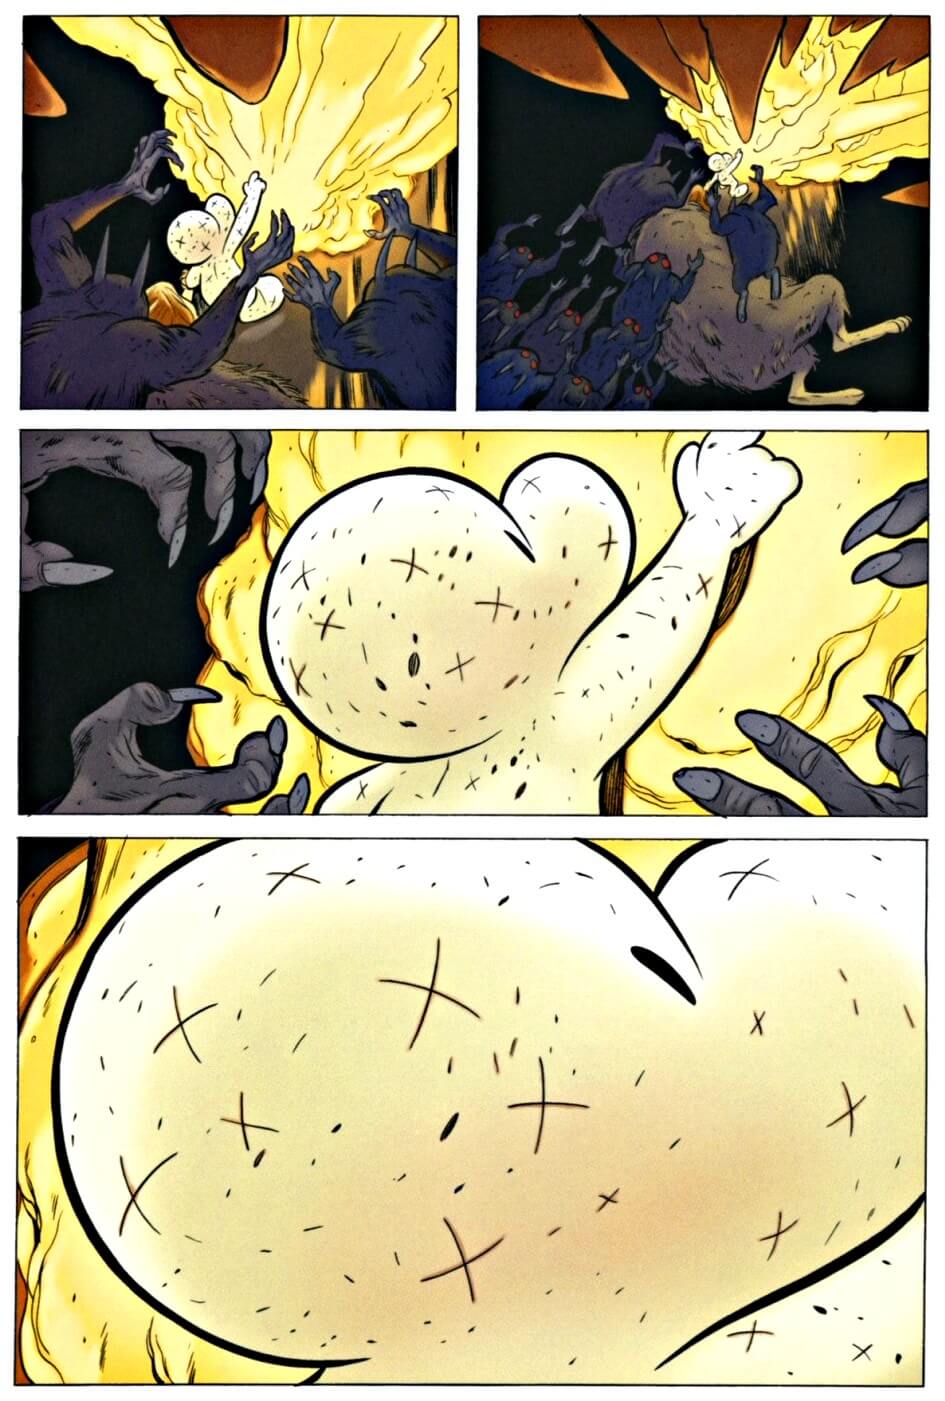 page 156 chapter 5 of bone 9 crown of horns graphic novel